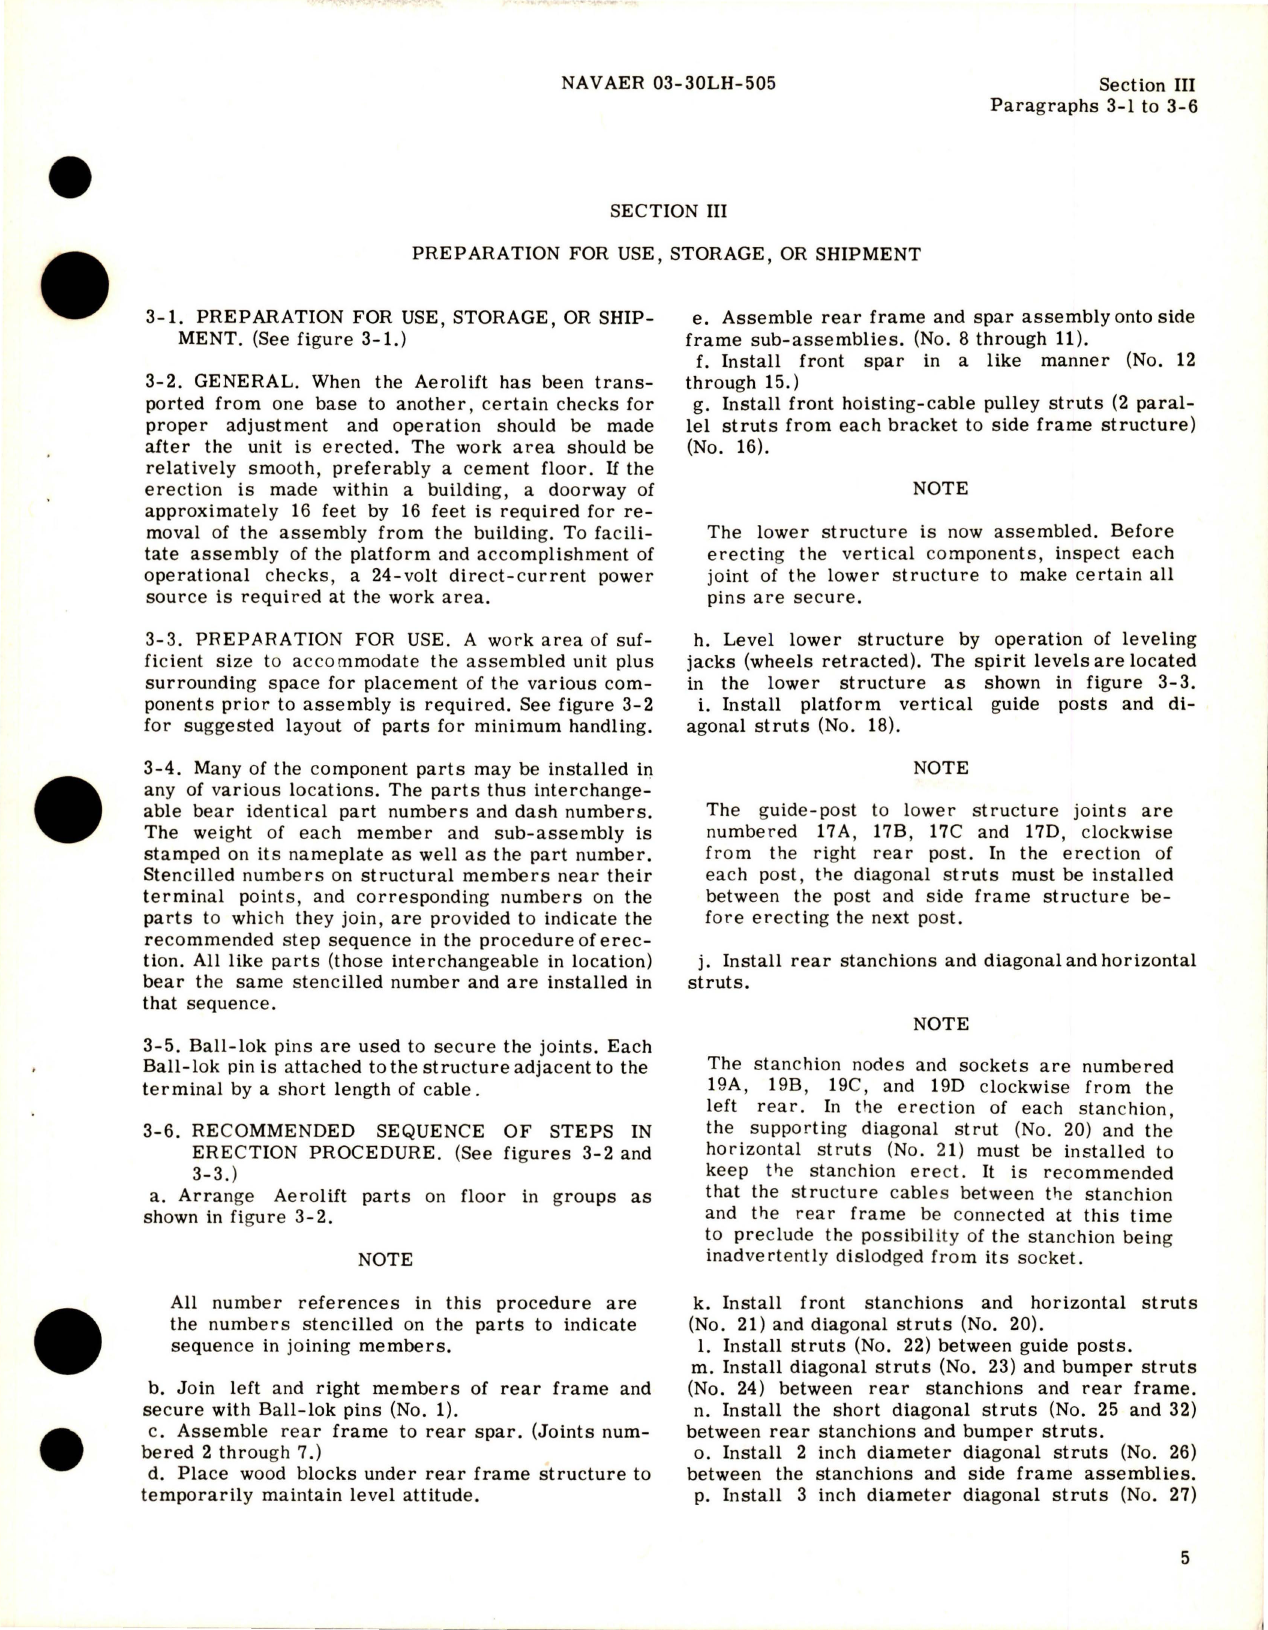 Sample page 9 from AirCorps Library document: Operation and Service Instructions for Aerolift Cargo Elevator - 319950